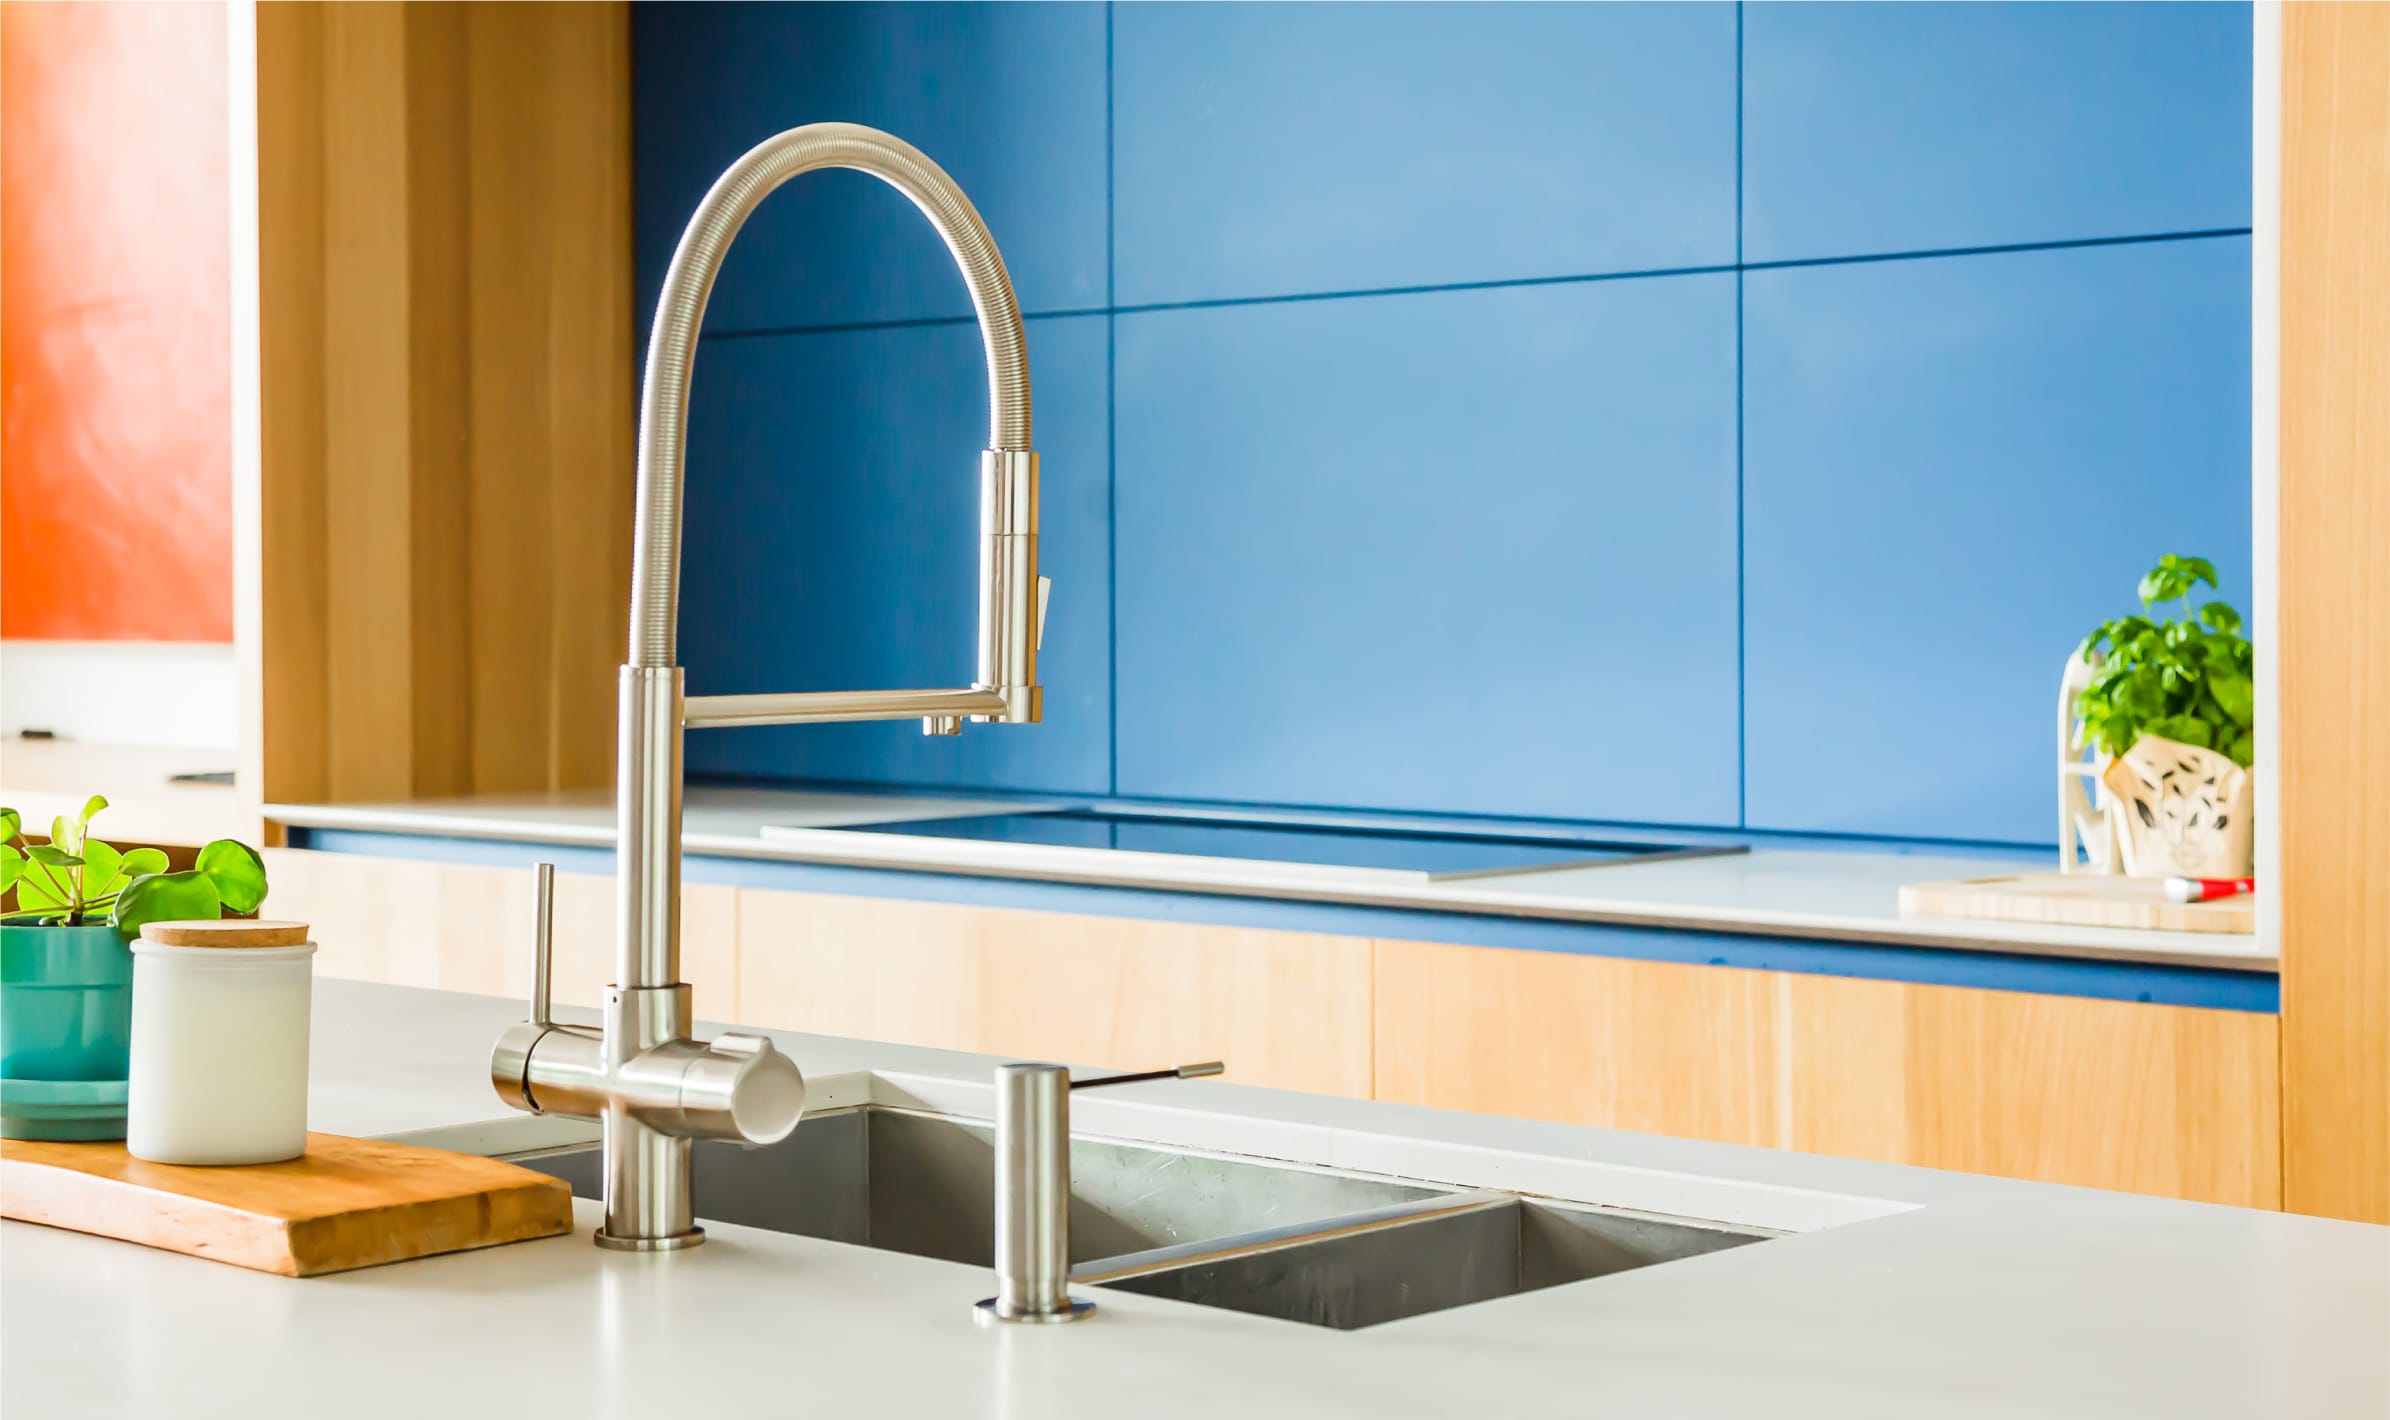 The Setzertap by Seltza, in a designer kitchen. The kitchen is blue and wood effect panelling. The tap is a brushed steel effect matching a steel sink. There are pot plants on the counter. Seltzatap brings carbonated water to your regular tap. 